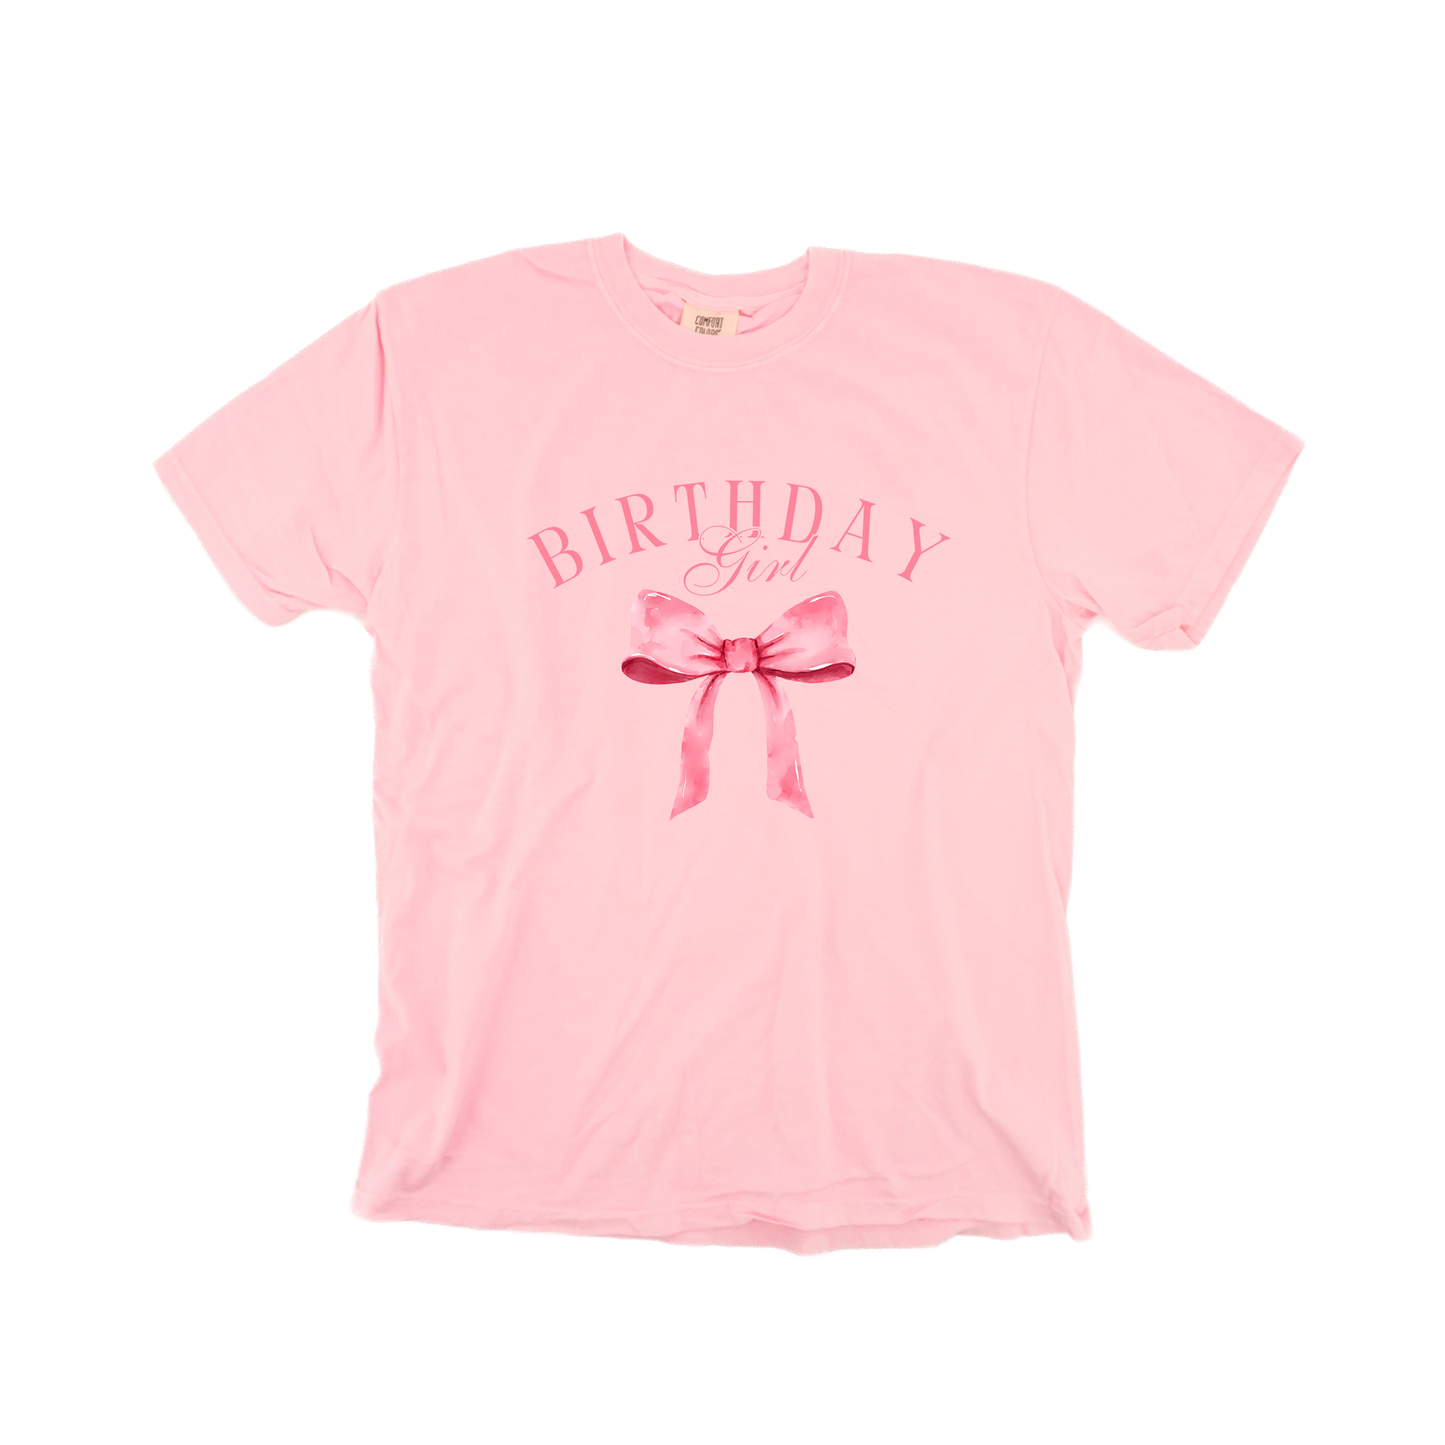 Birthday Girl (Bows) - Tee (Pale Pink)